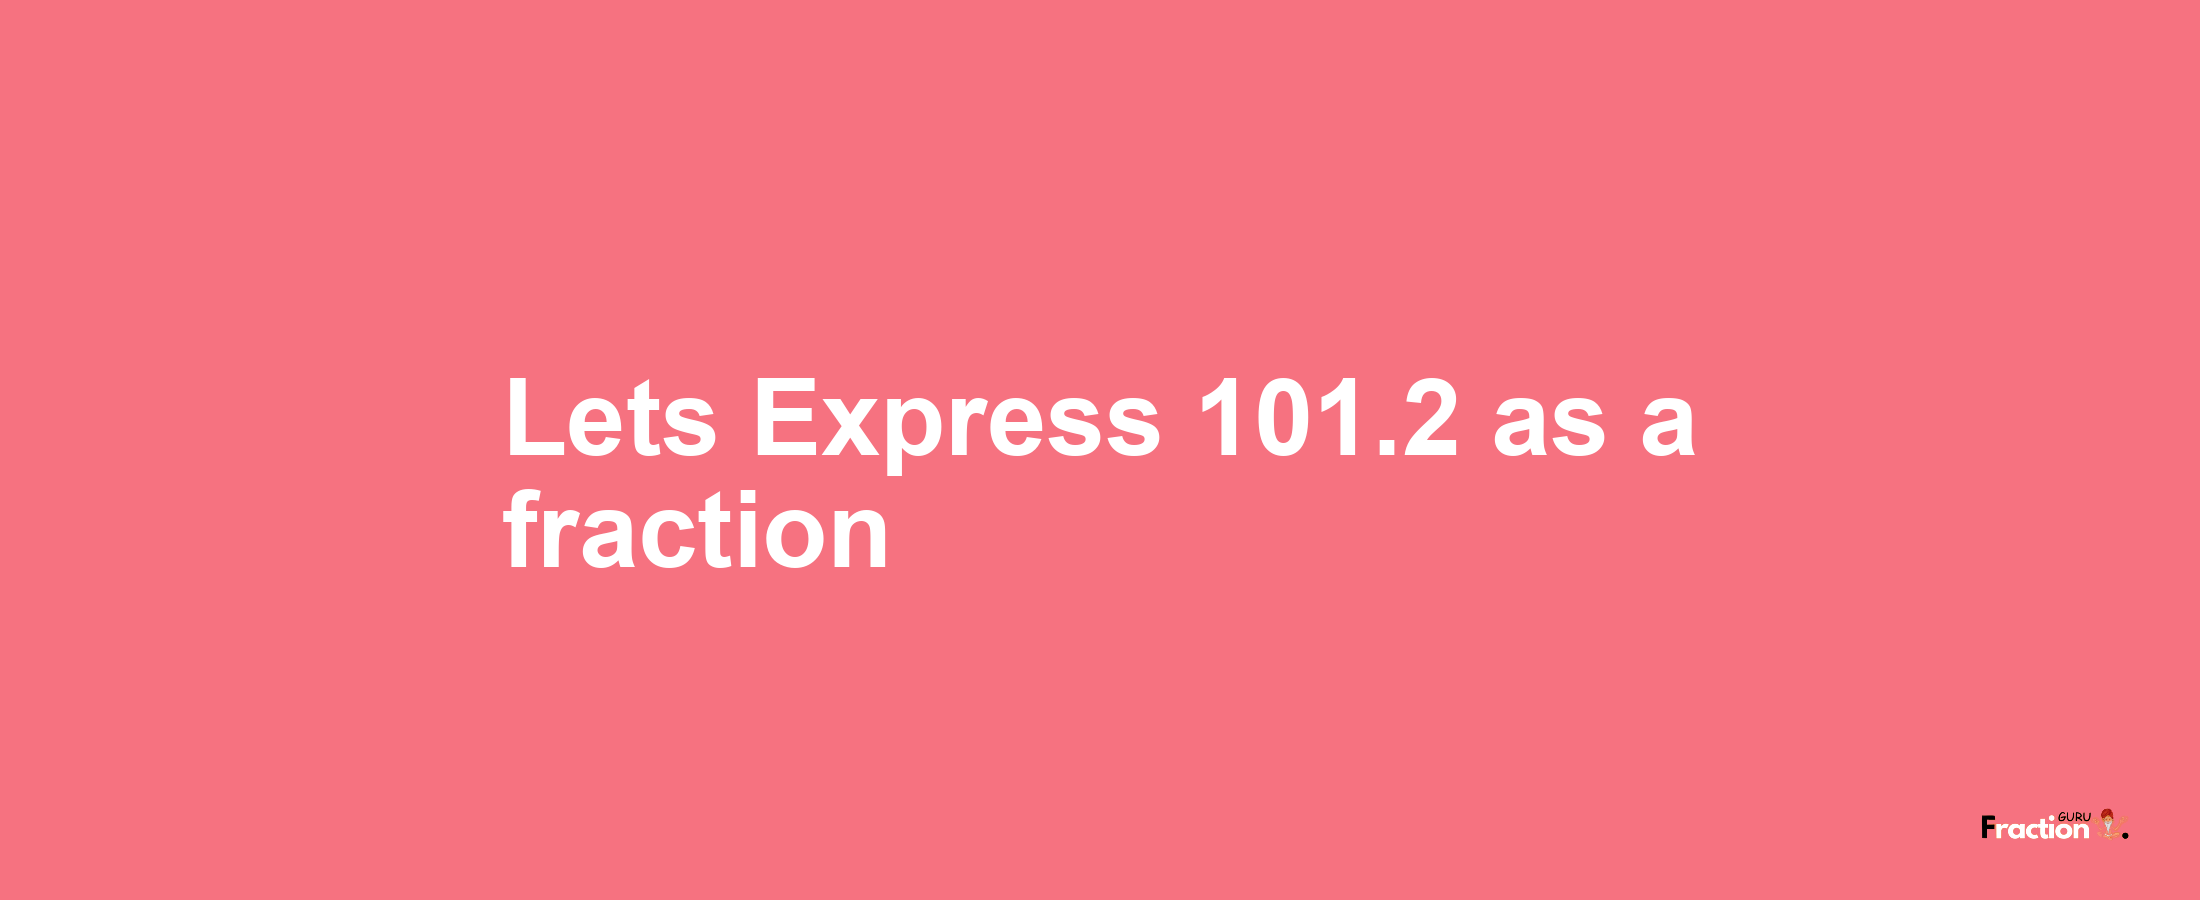 Lets Express 101.2 as afraction